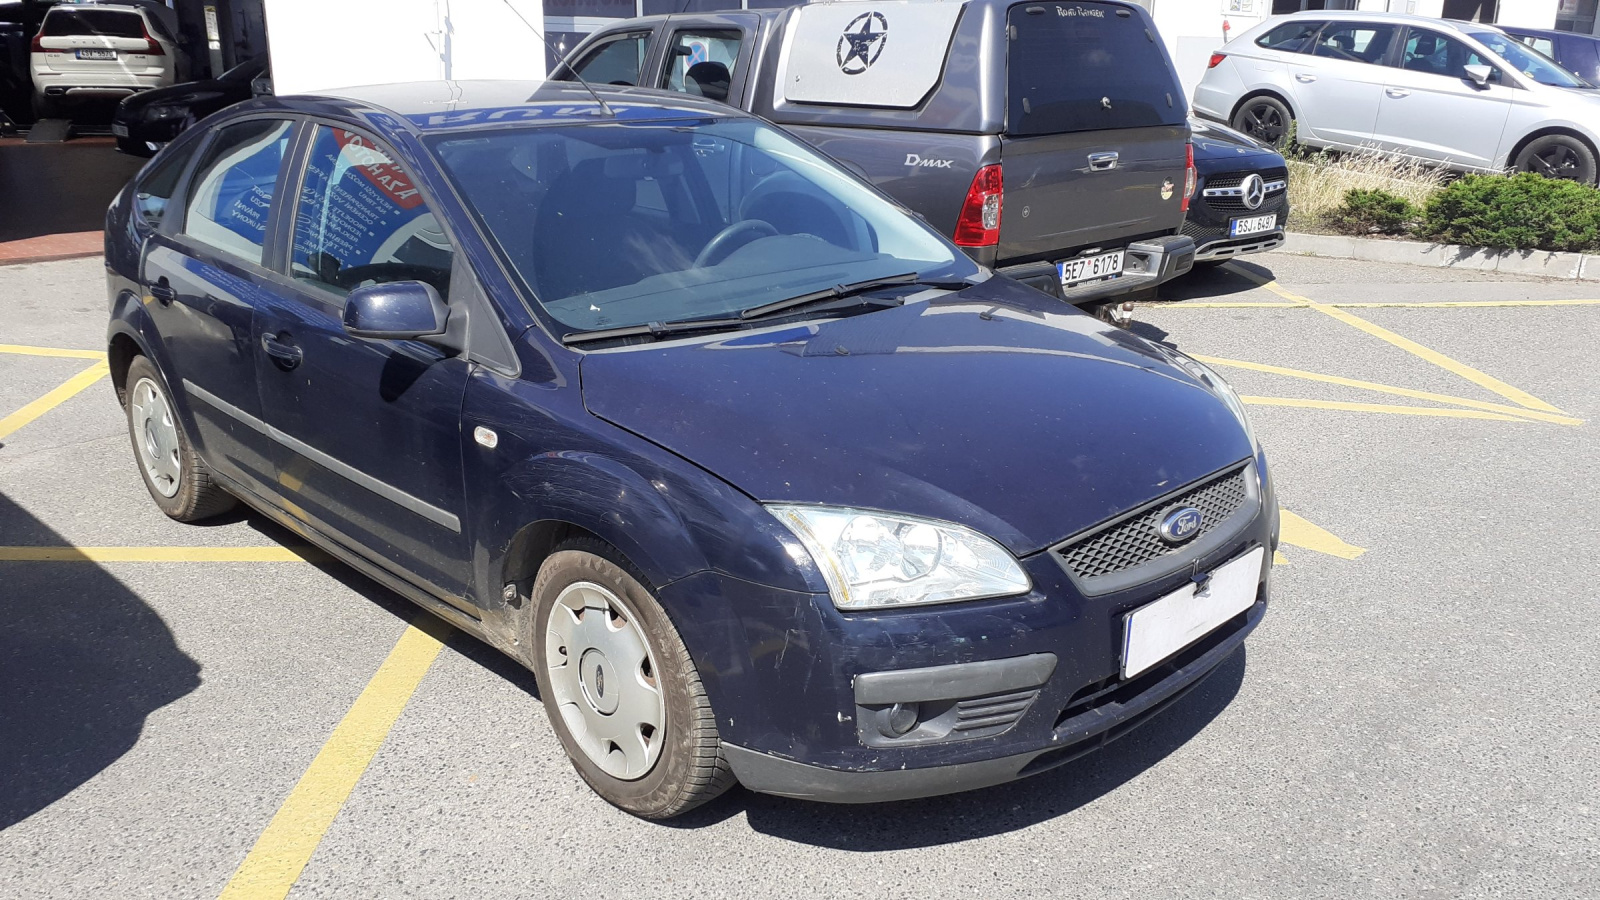 Ford Focus, 2007, 1.6 TDCi, 66kW